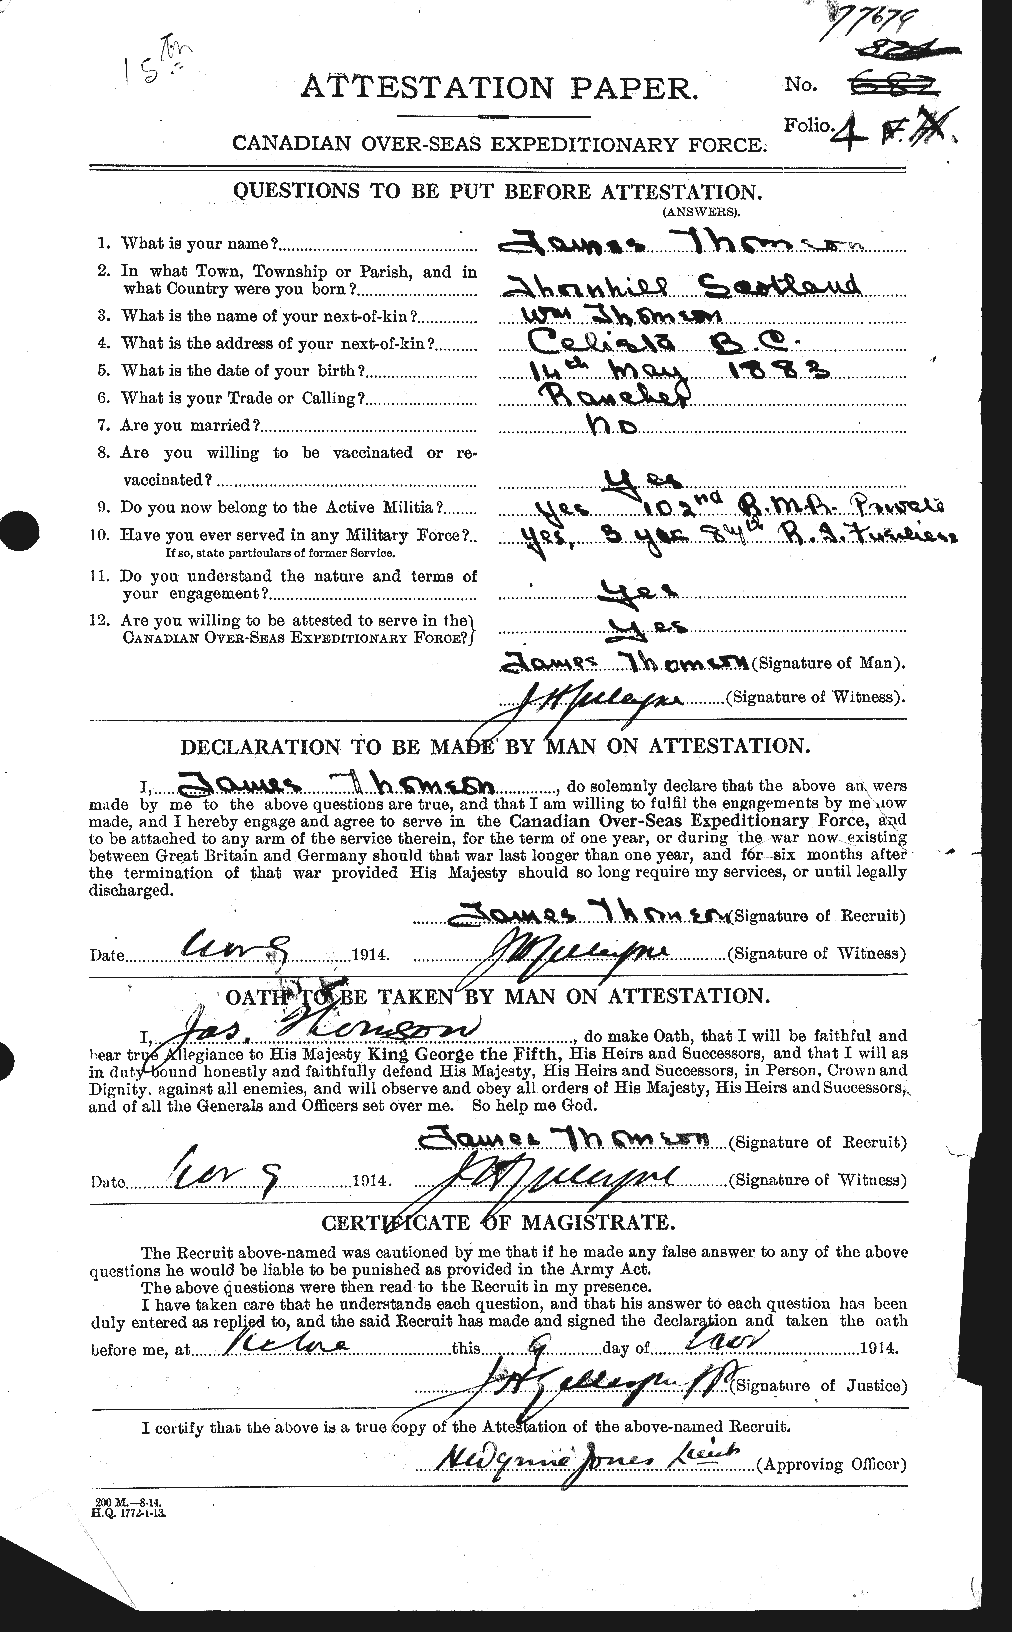 Personnel Records of the First World War - CEF 633795a